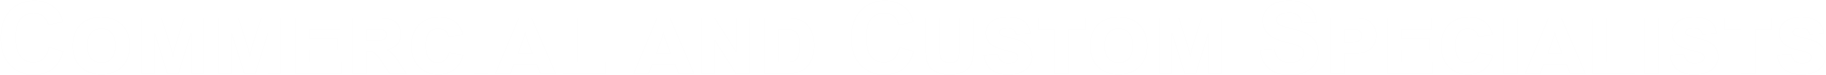 A green background with the letter c in white.